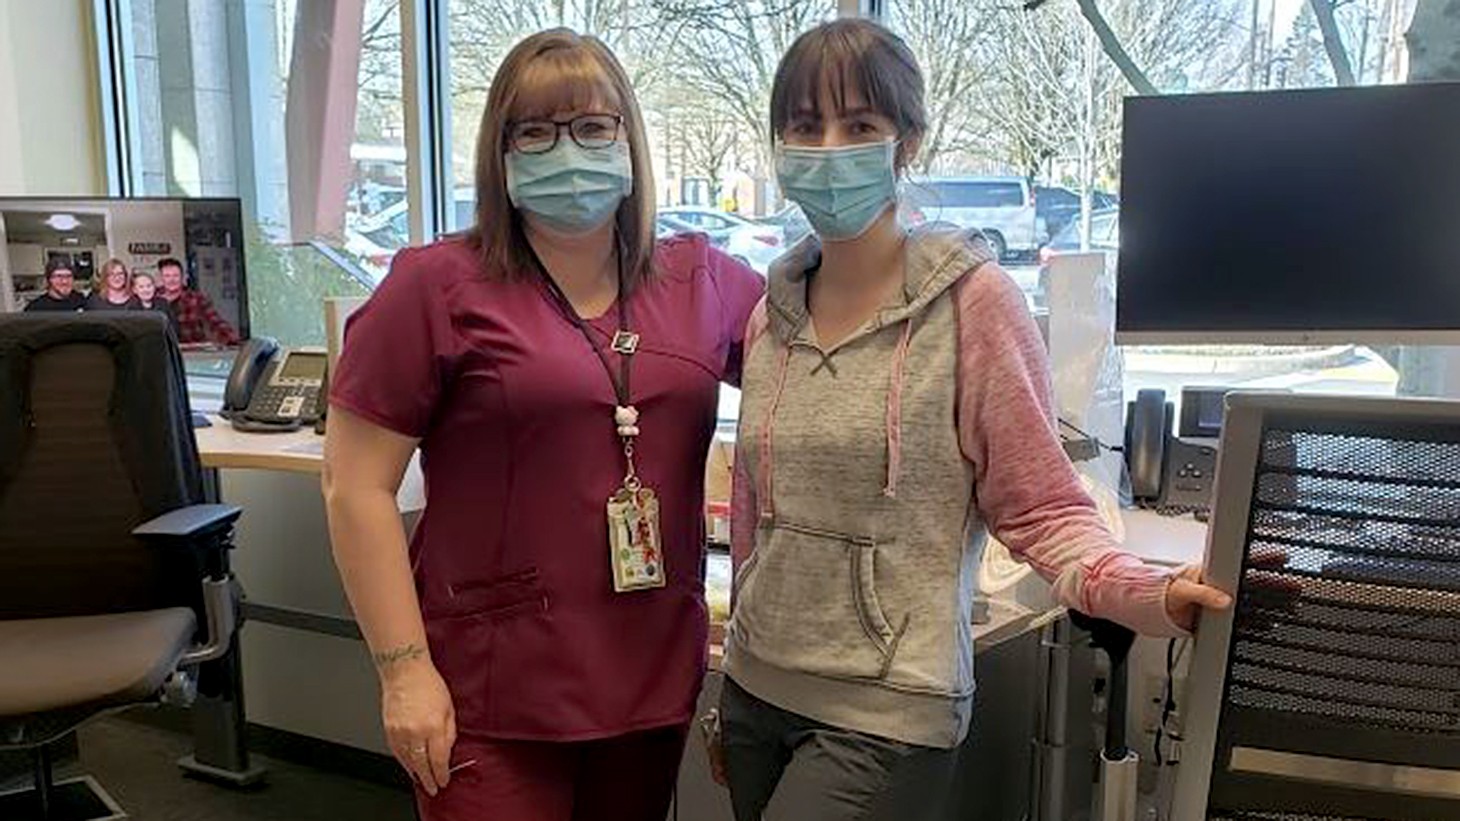 Two women, health care workers, posing together in an office